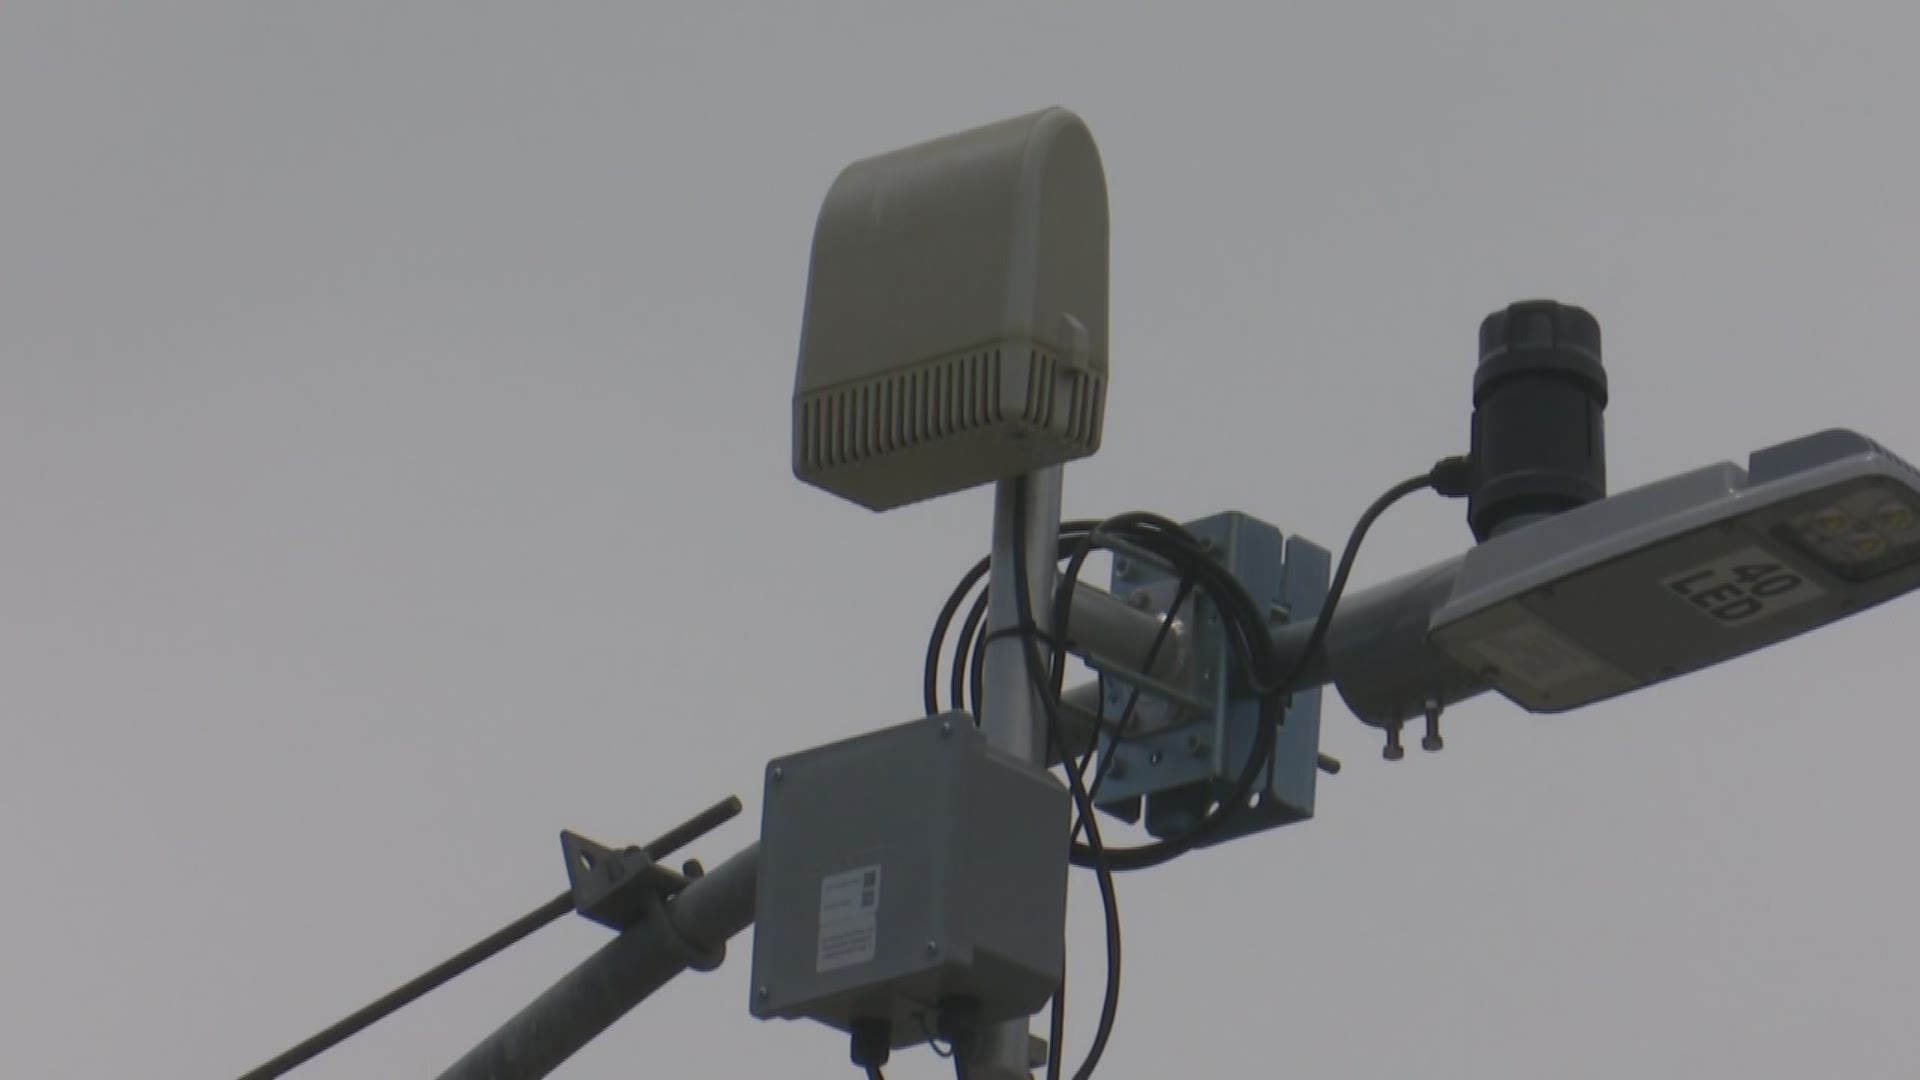 Two city council members say the ShotSpotter pilot program is not worth pursuing.